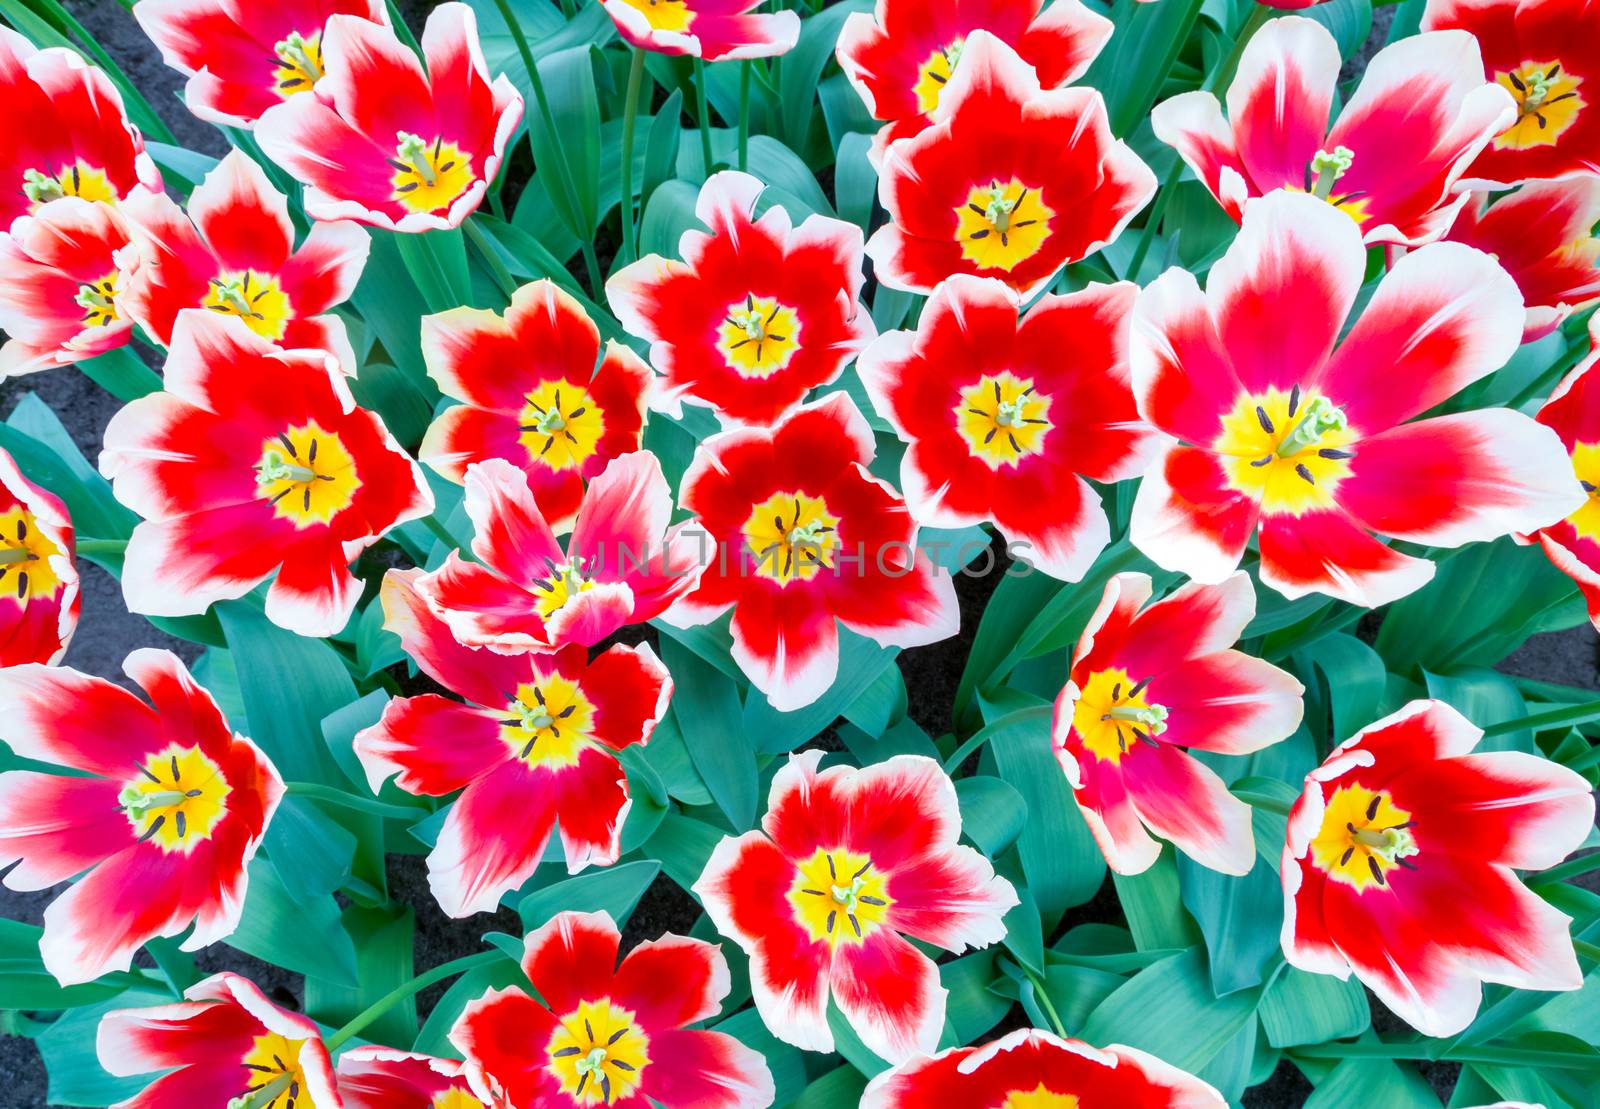 Group of red with white tulips view from above. Green leaveas as background